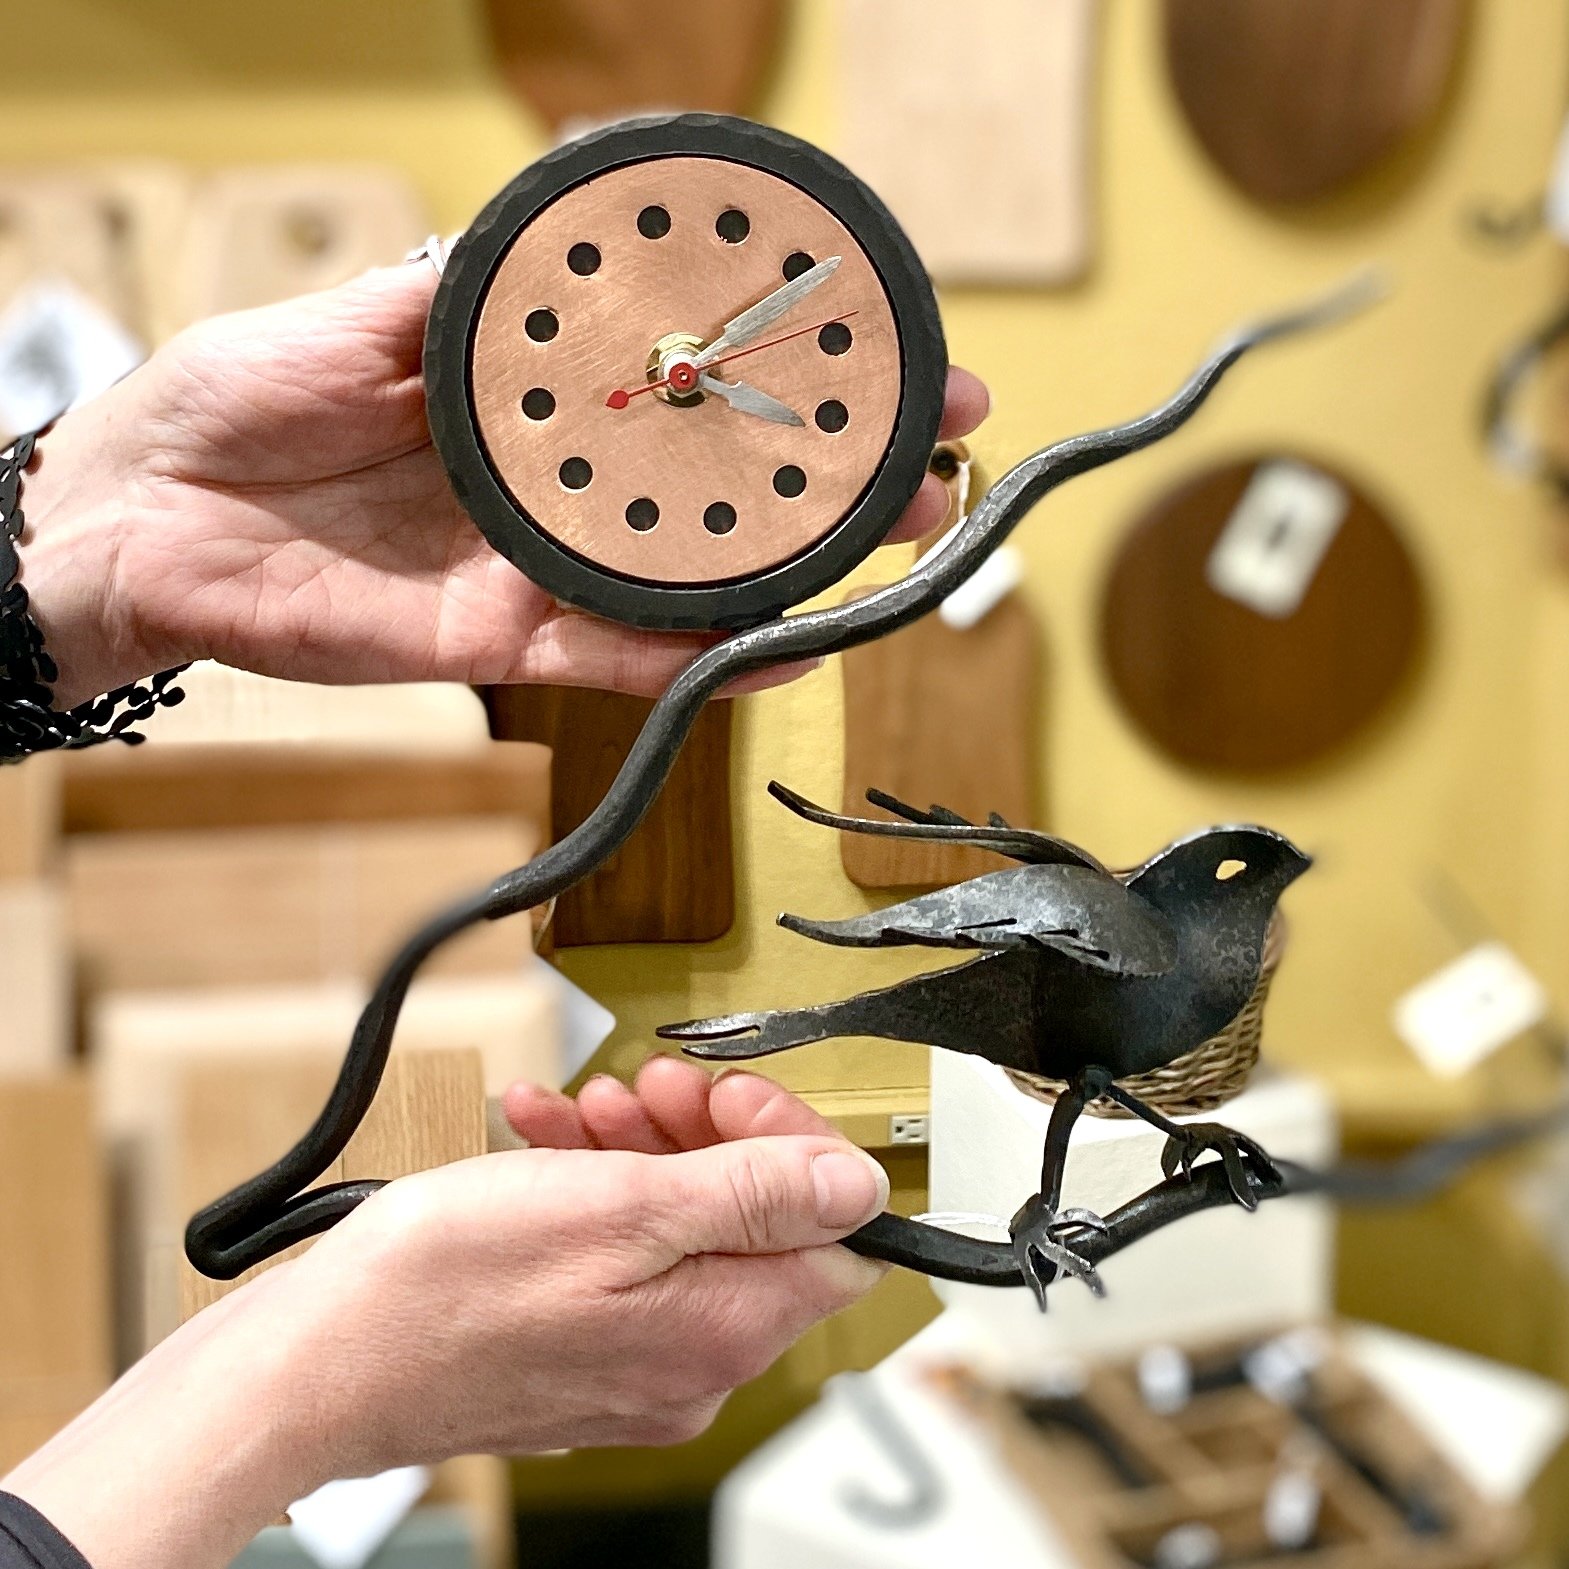 Welcome to today's Staff Pick! Gallery manager Deborah Van Ness selected this bird wall clock by blacksmith Steven Bronstein of @blackthorneforge. She really loves that it's a functional art piece.

In addition, she finds it to be a perfect reflectio